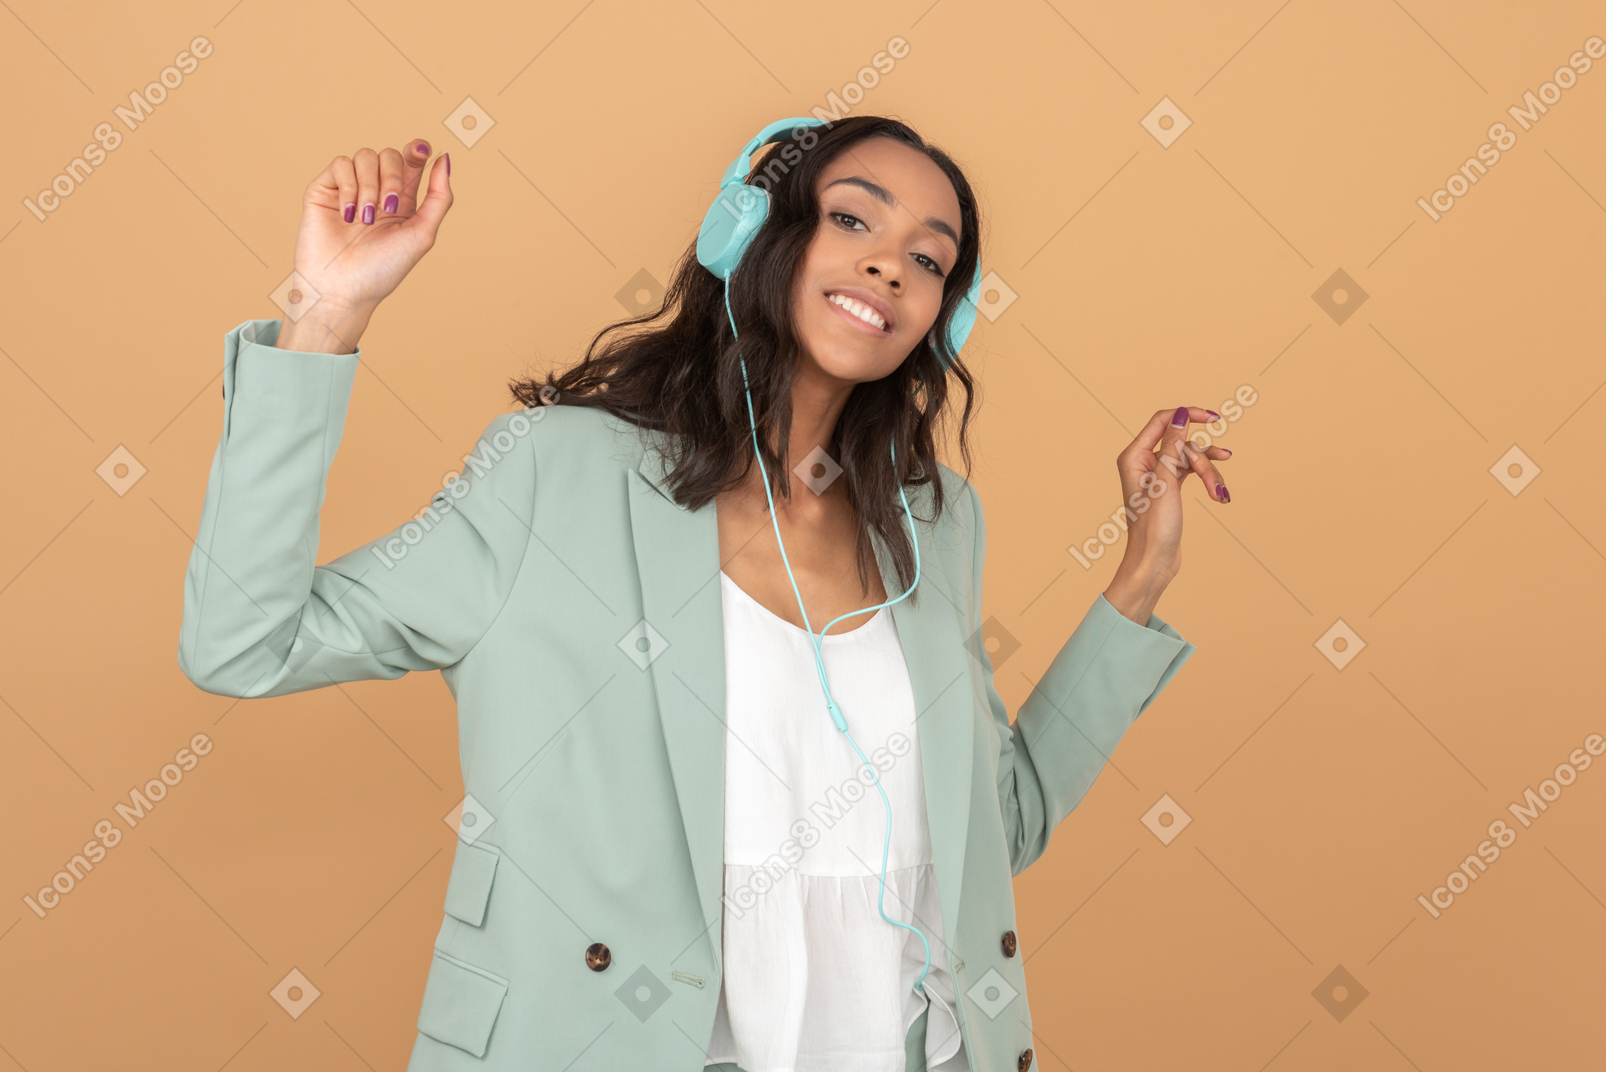 Attractive young girl listening to music and holding her hands up